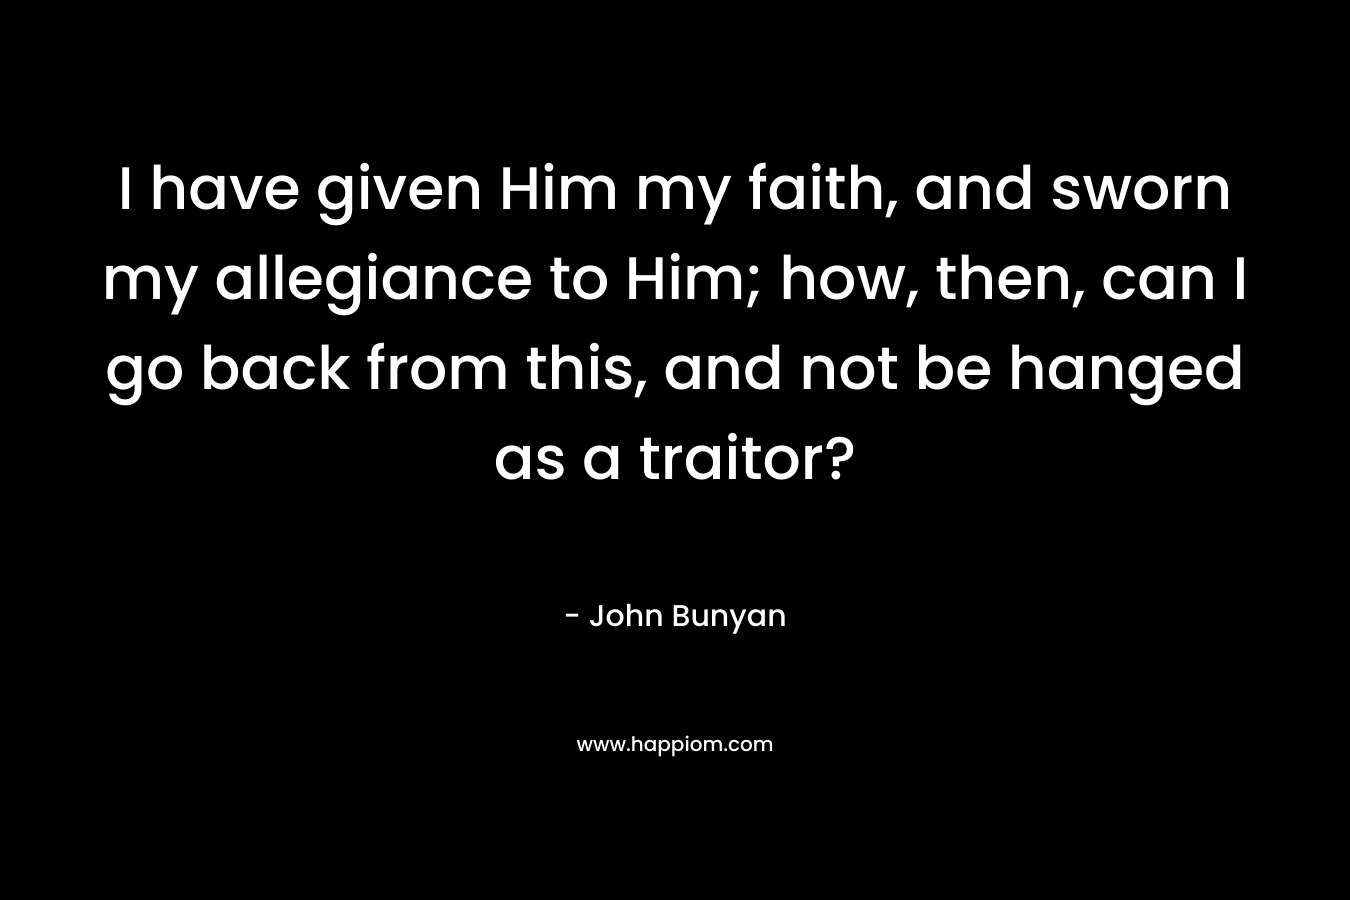 I have given Him my faith, and sworn my allegiance to Him; how, then, can I go back from this, and not be hanged as a traitor?